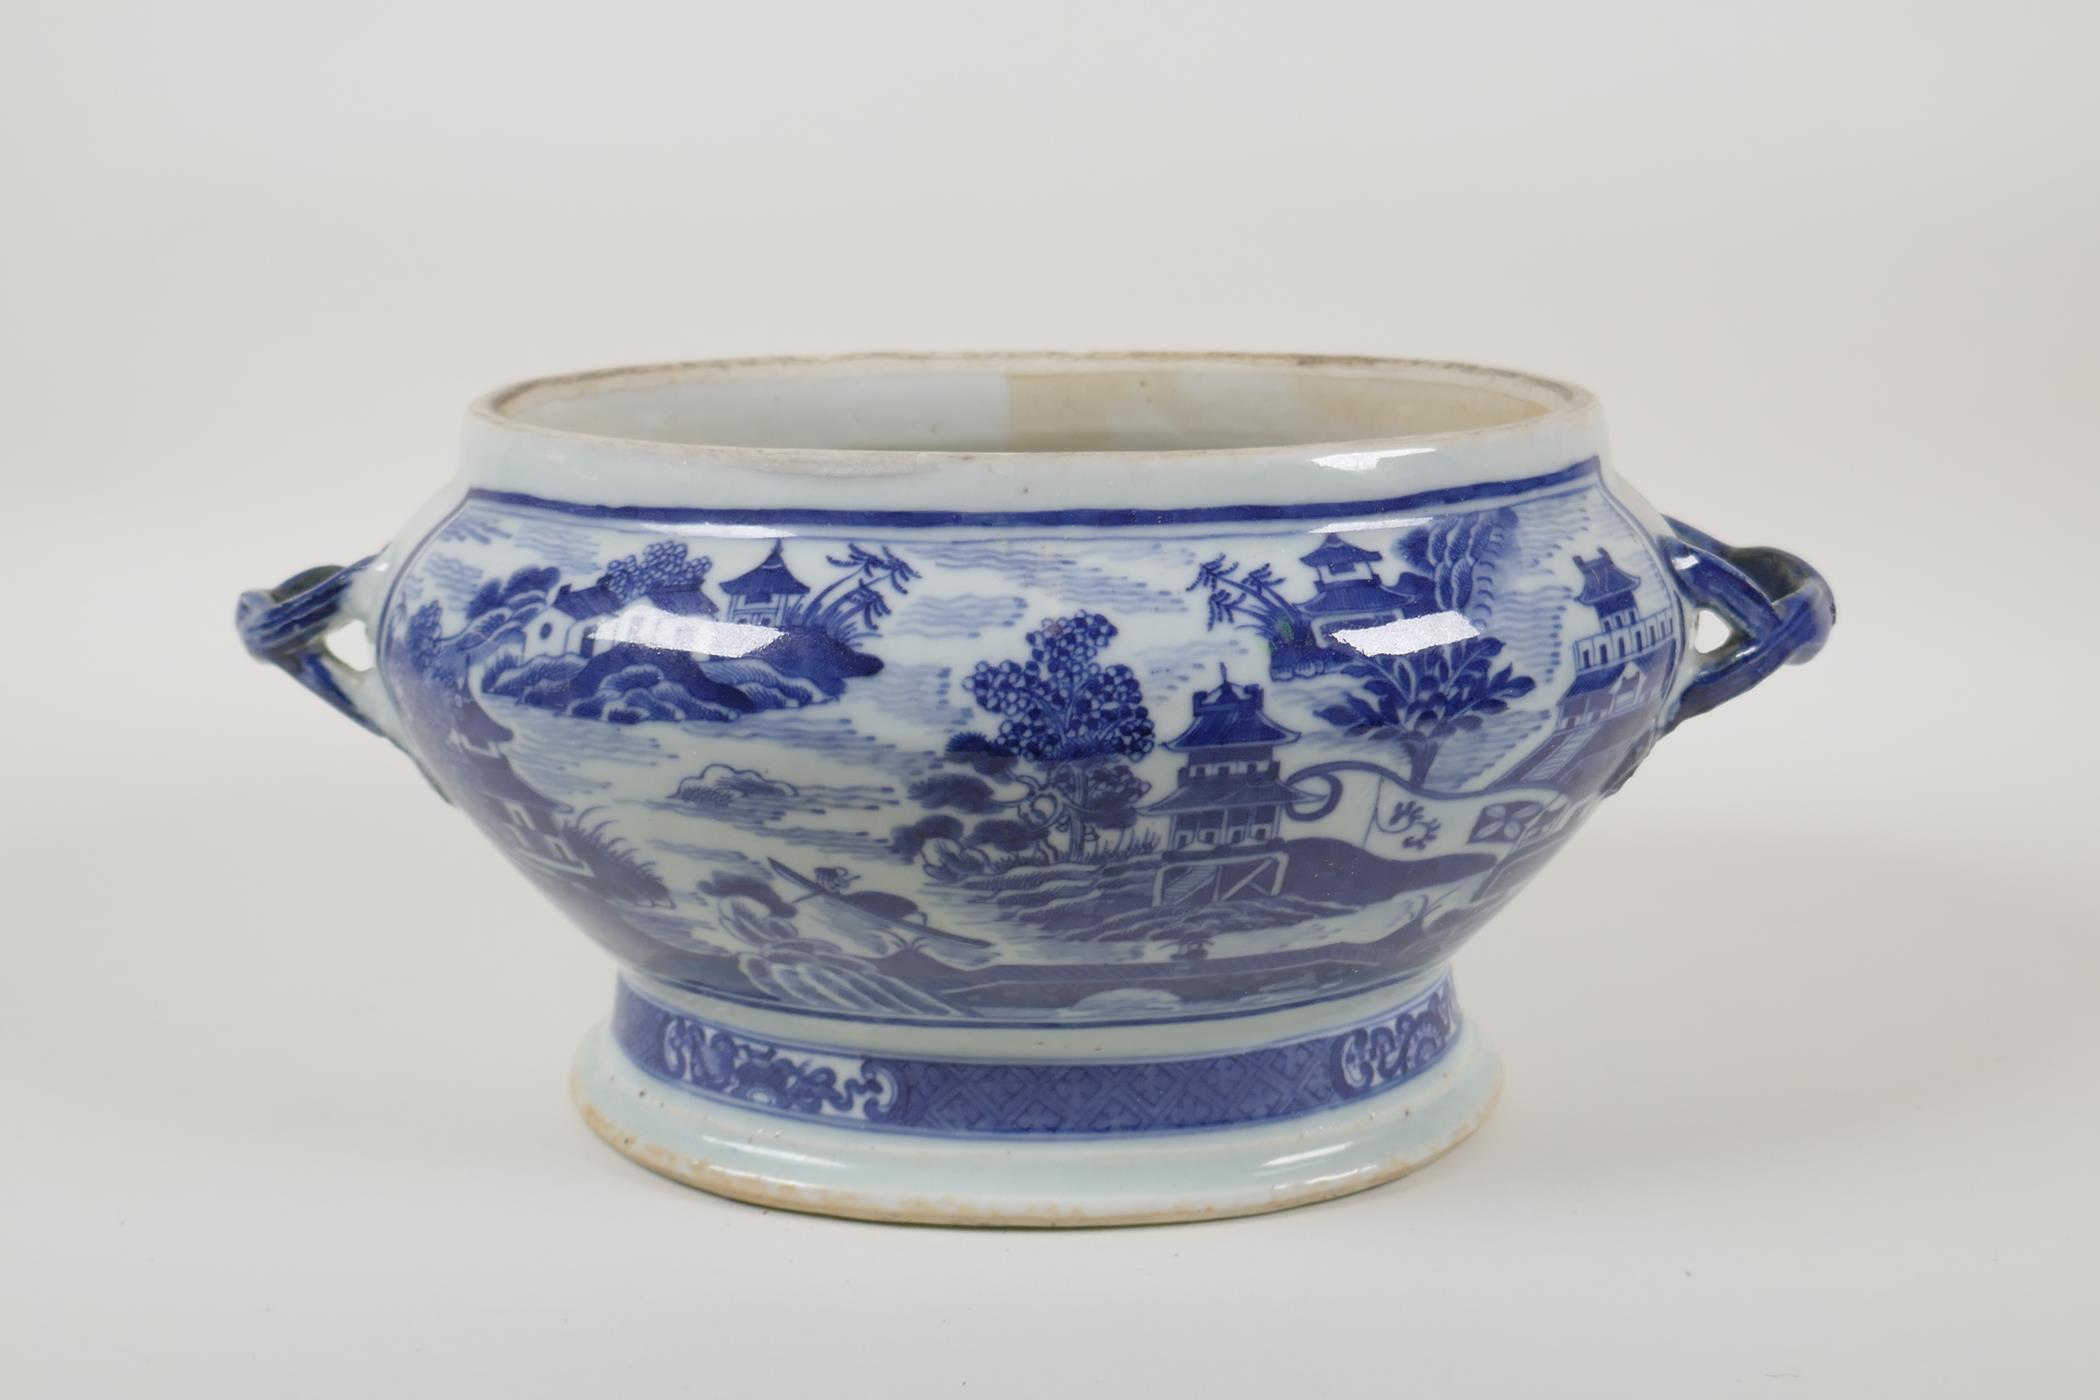 A Chinese blue and white porcelain export ware two handled pot/dish, with riverside landscape